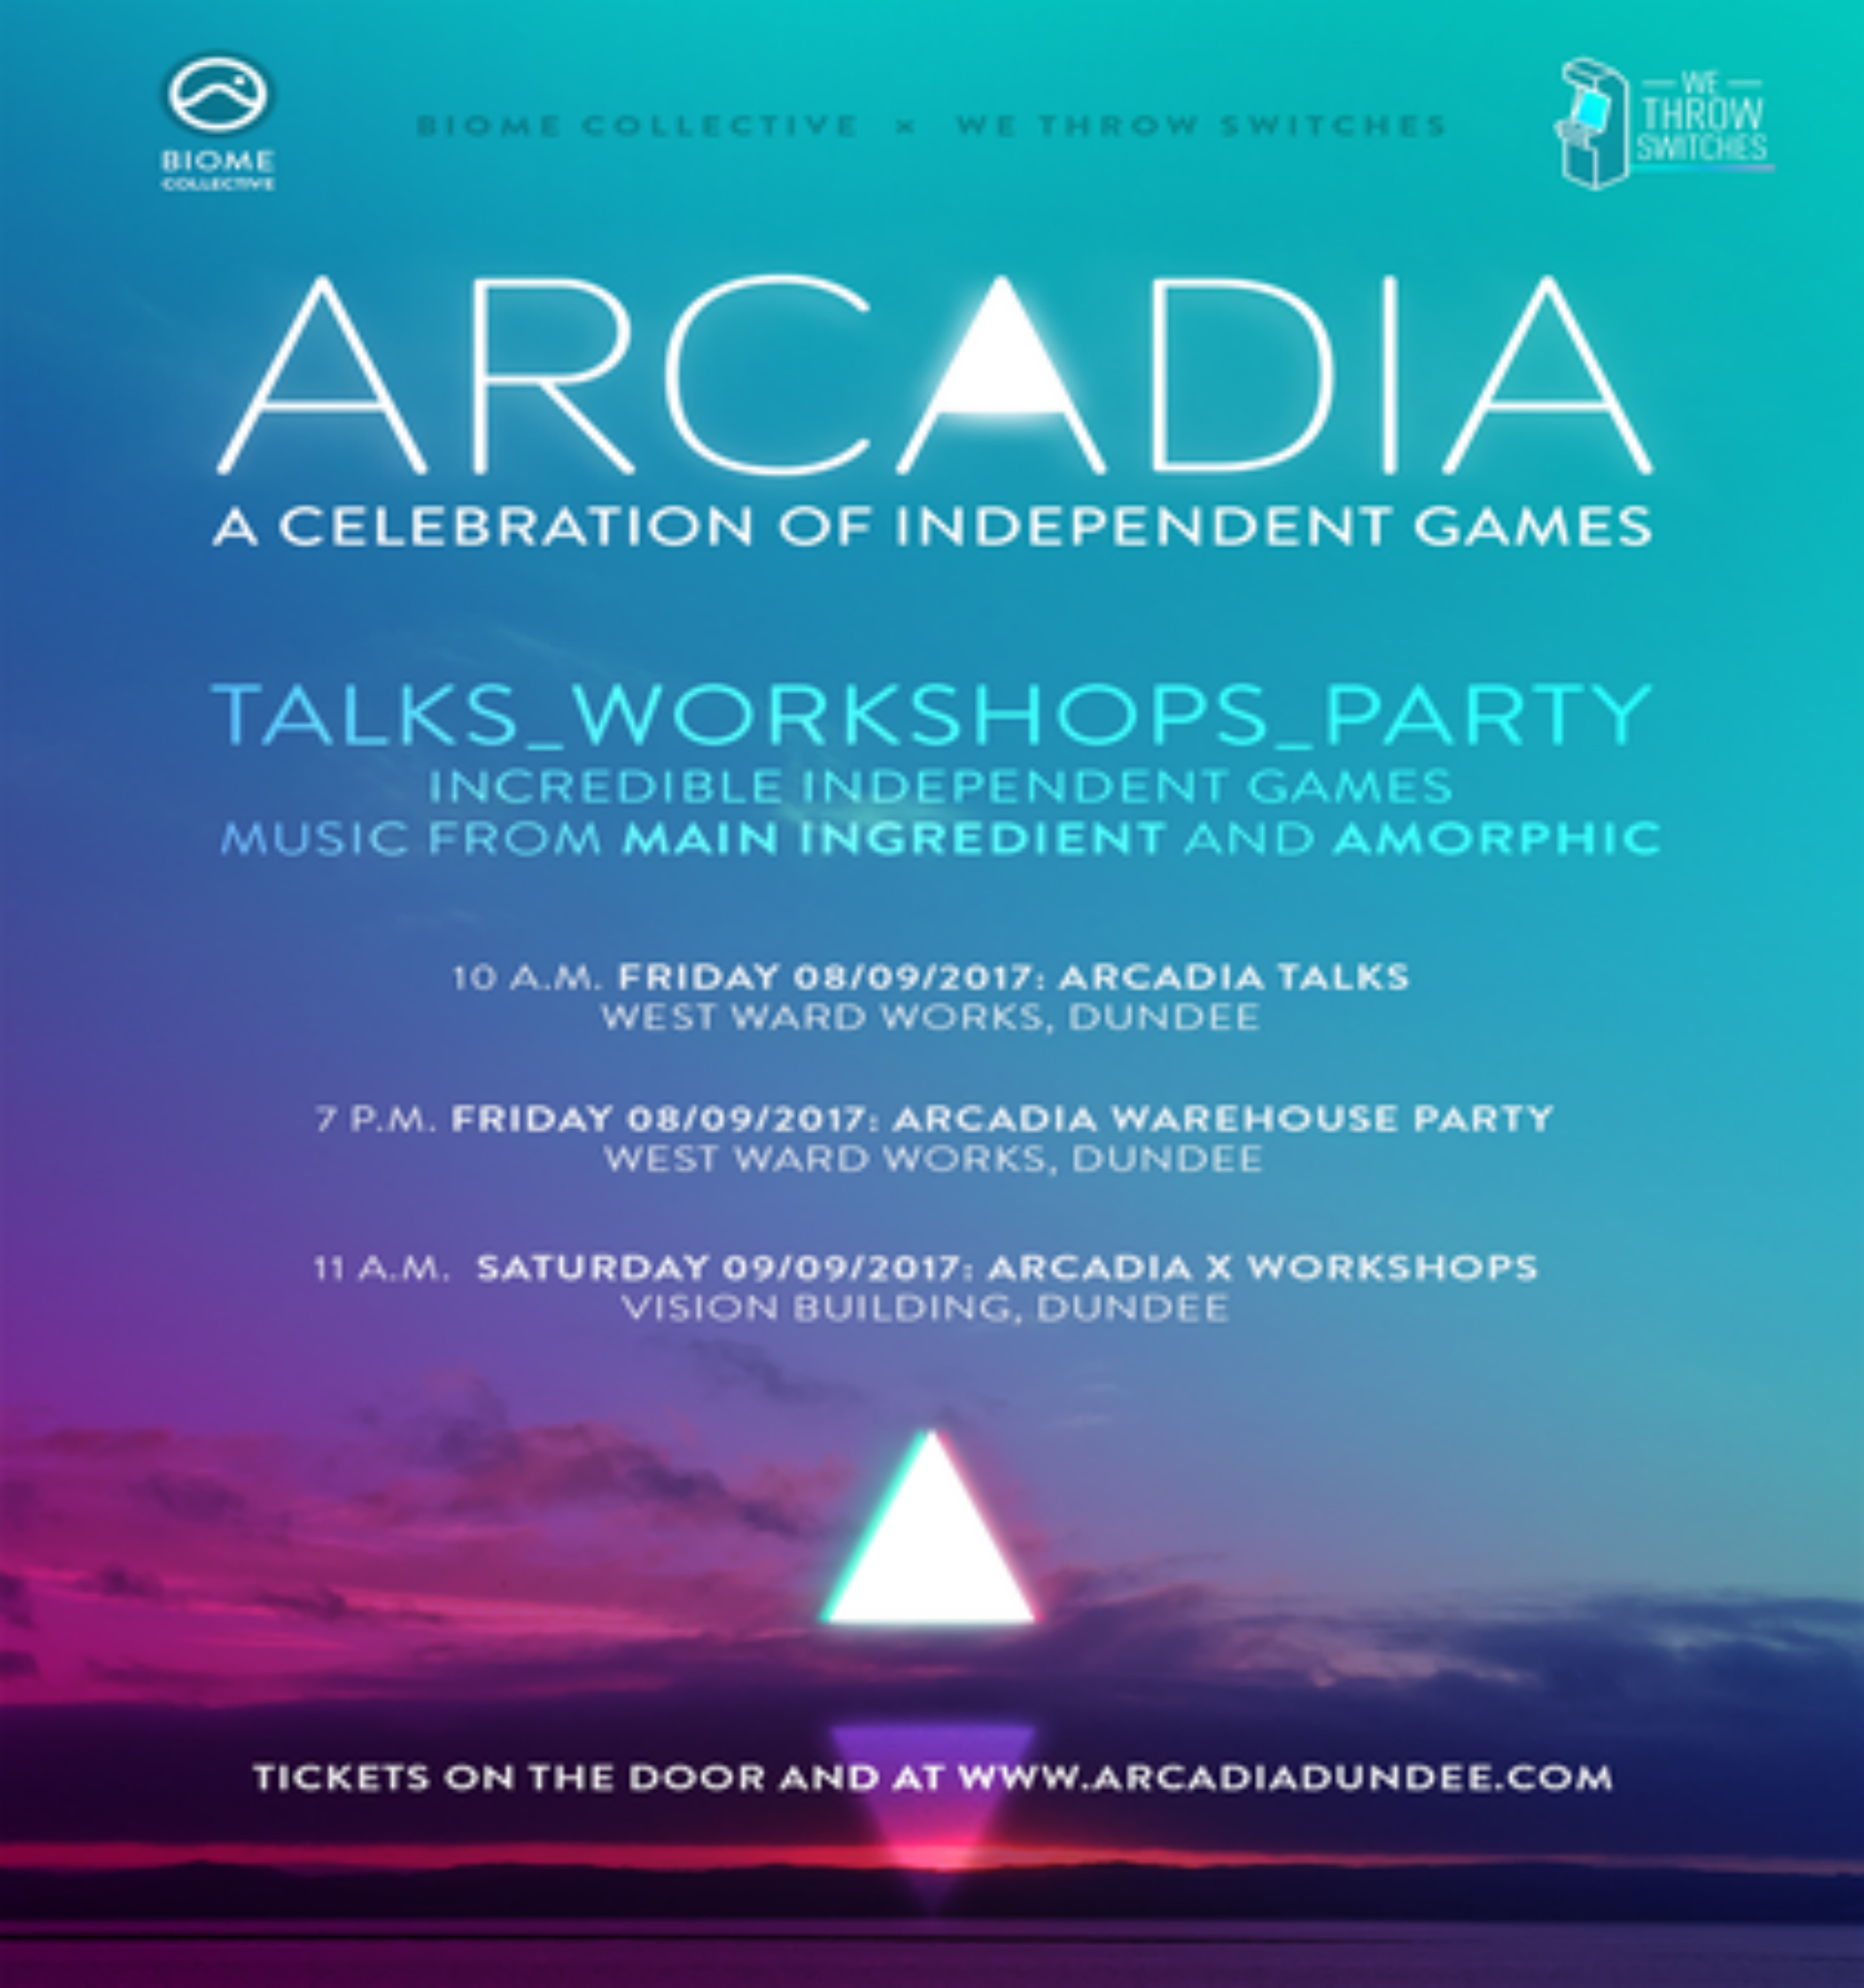 International games designers to appear at Arcadia